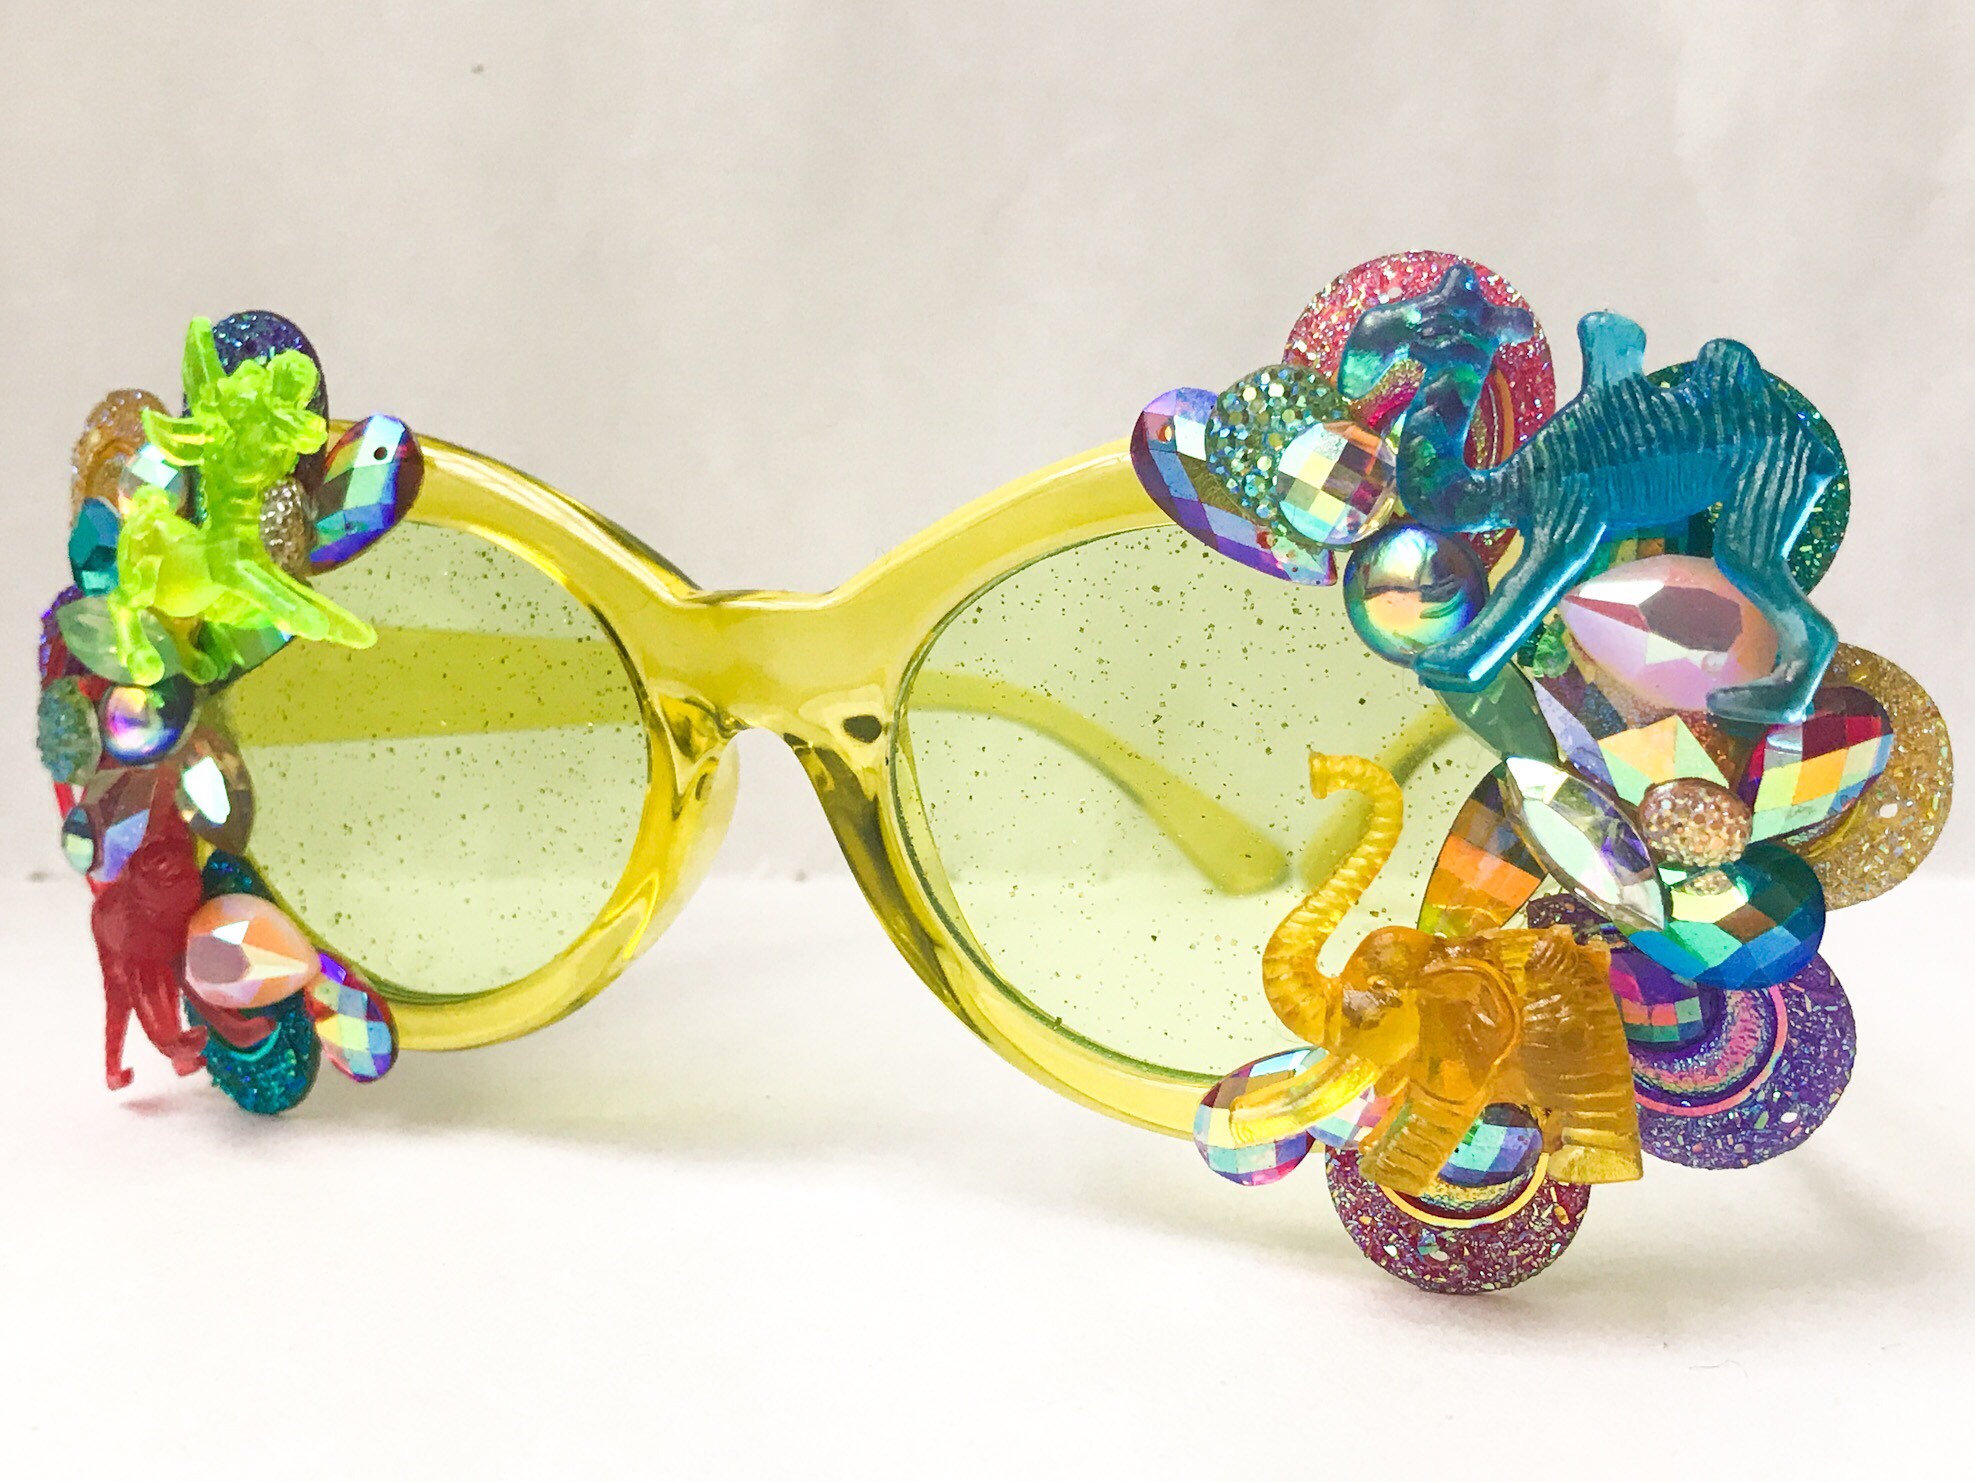 endelse Alvorlig tåbelig Party Animal Clout Sunglasses - Rainbow Oval Sunglasses Embellished w  Vintage Animals & Rhinestones - Yellow Clout Goggles for Funky Sunglasses